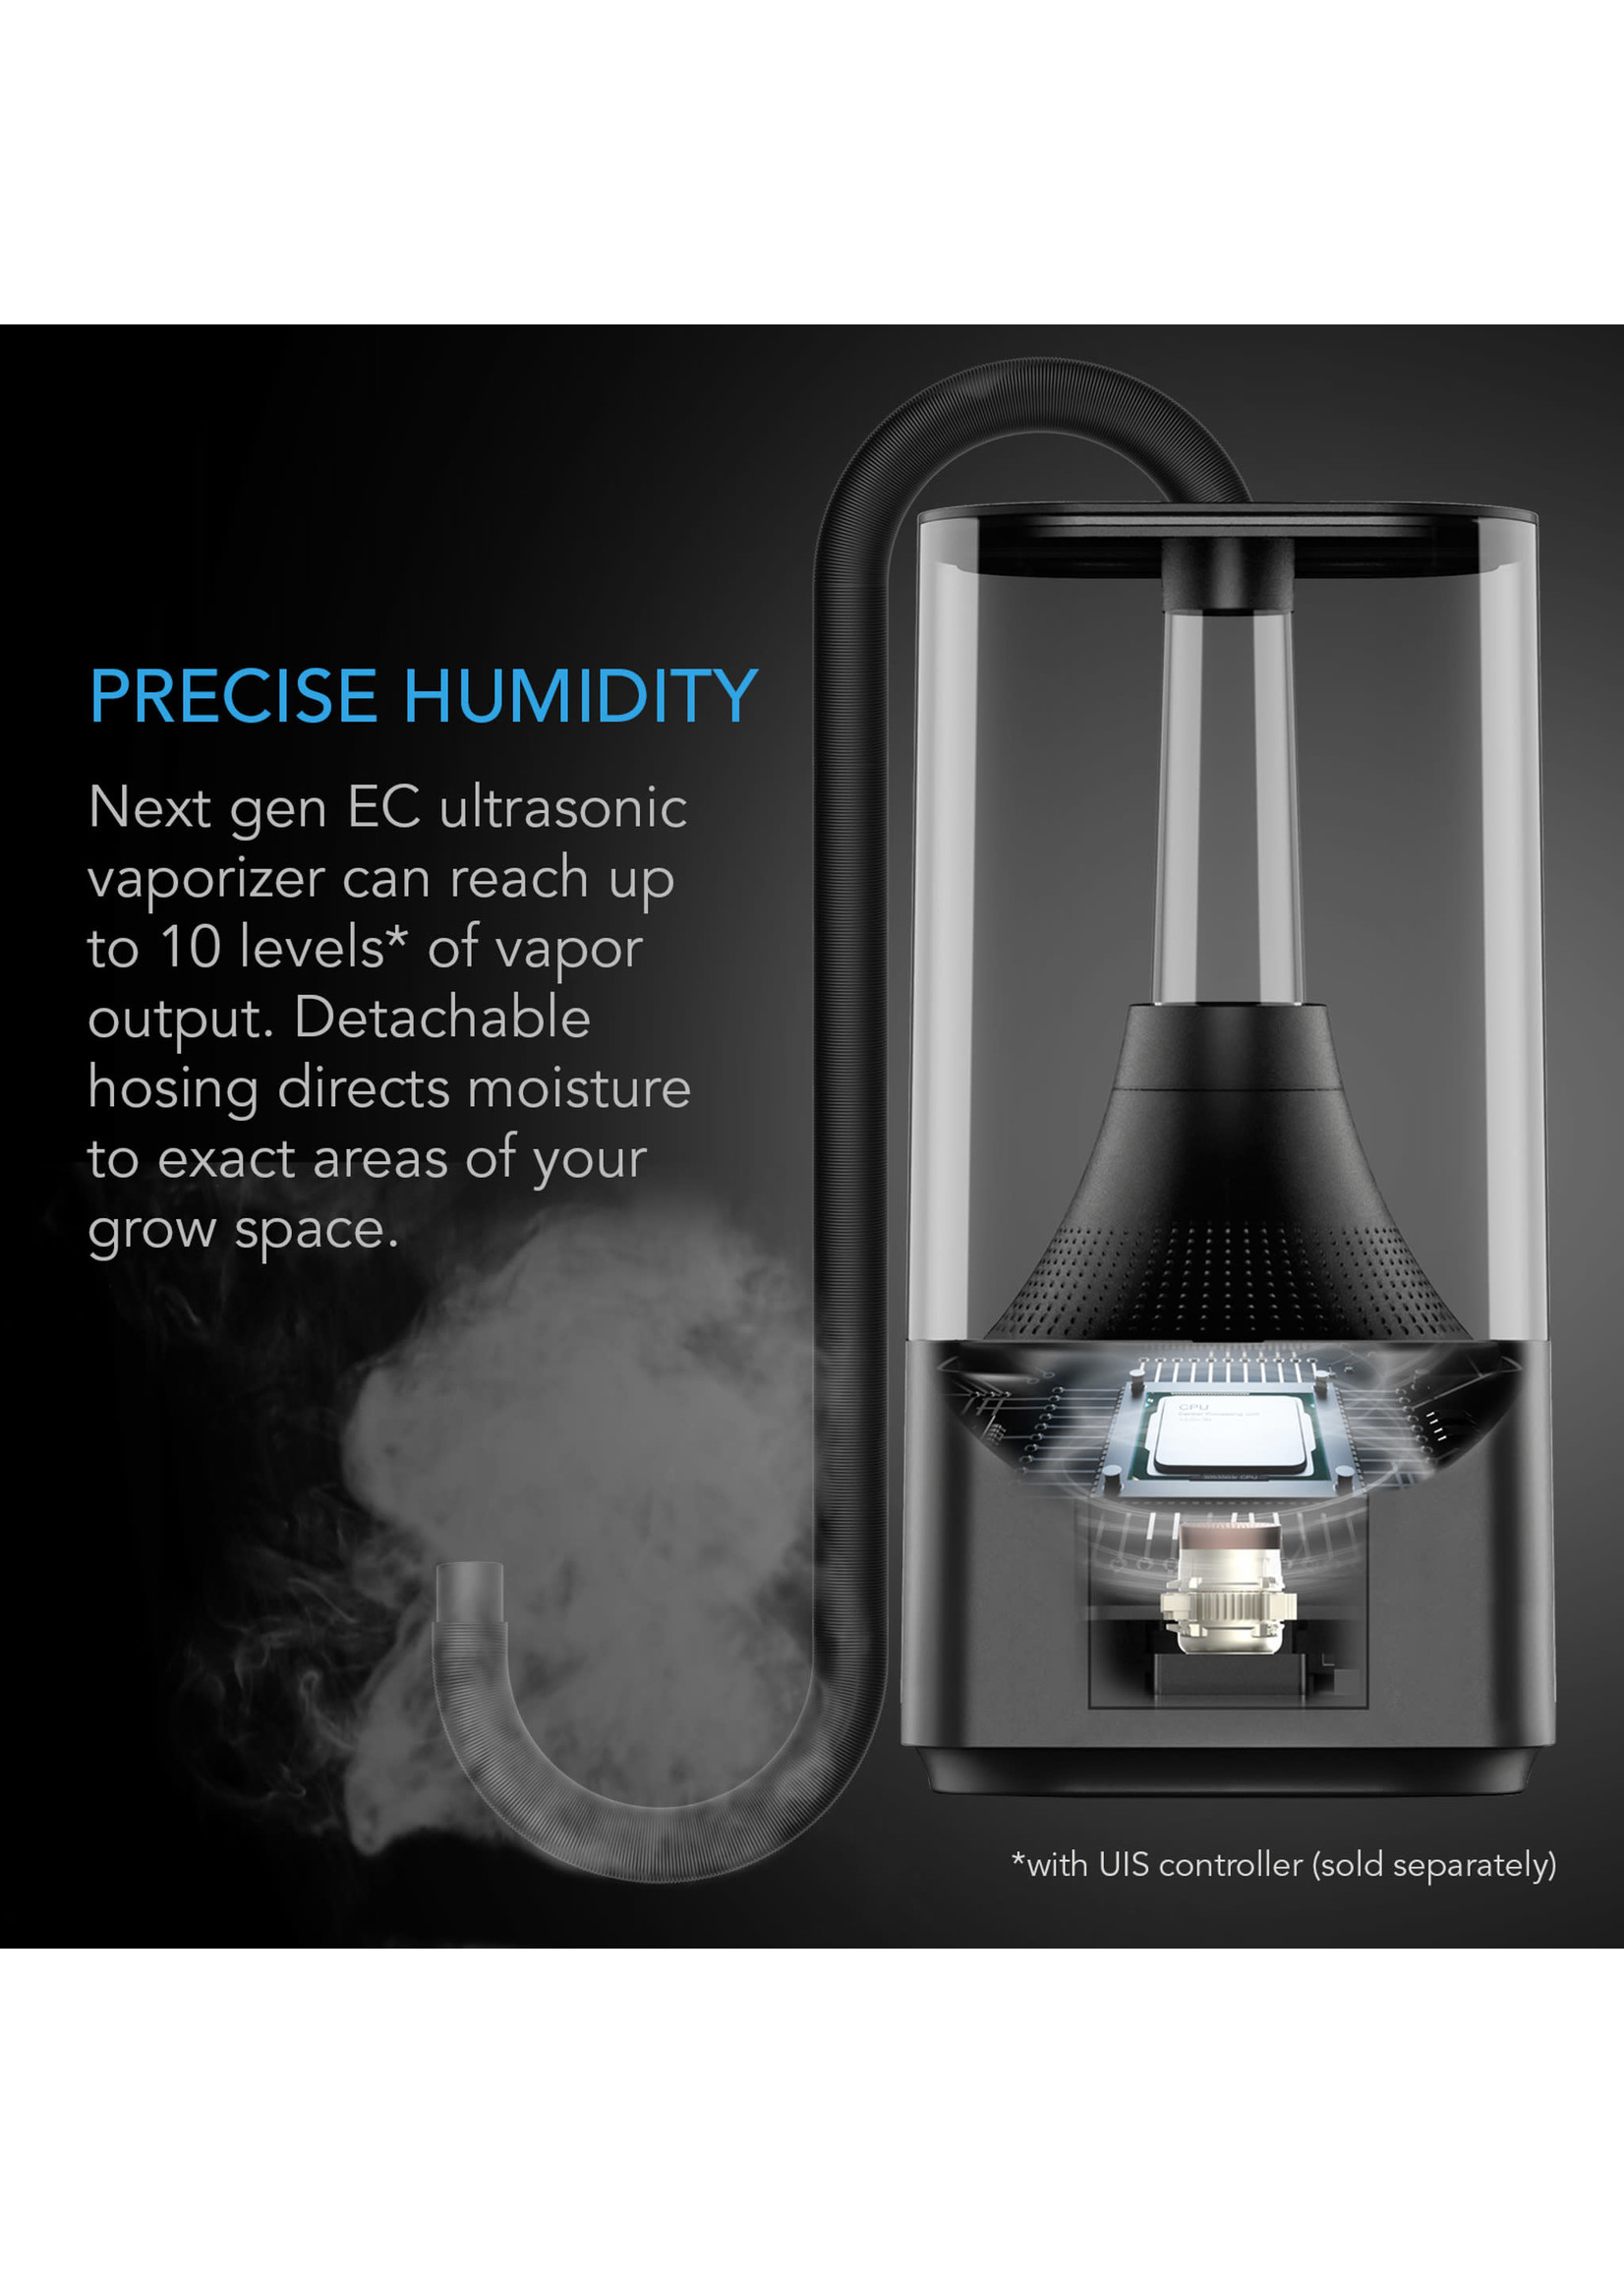 AC Infinity CLOUDFORGE T3, ENVIRONMENTAL PLANT HUMIDIFIER, 4.5L, SMART CONTROLS, TARGETED VAPORIZING